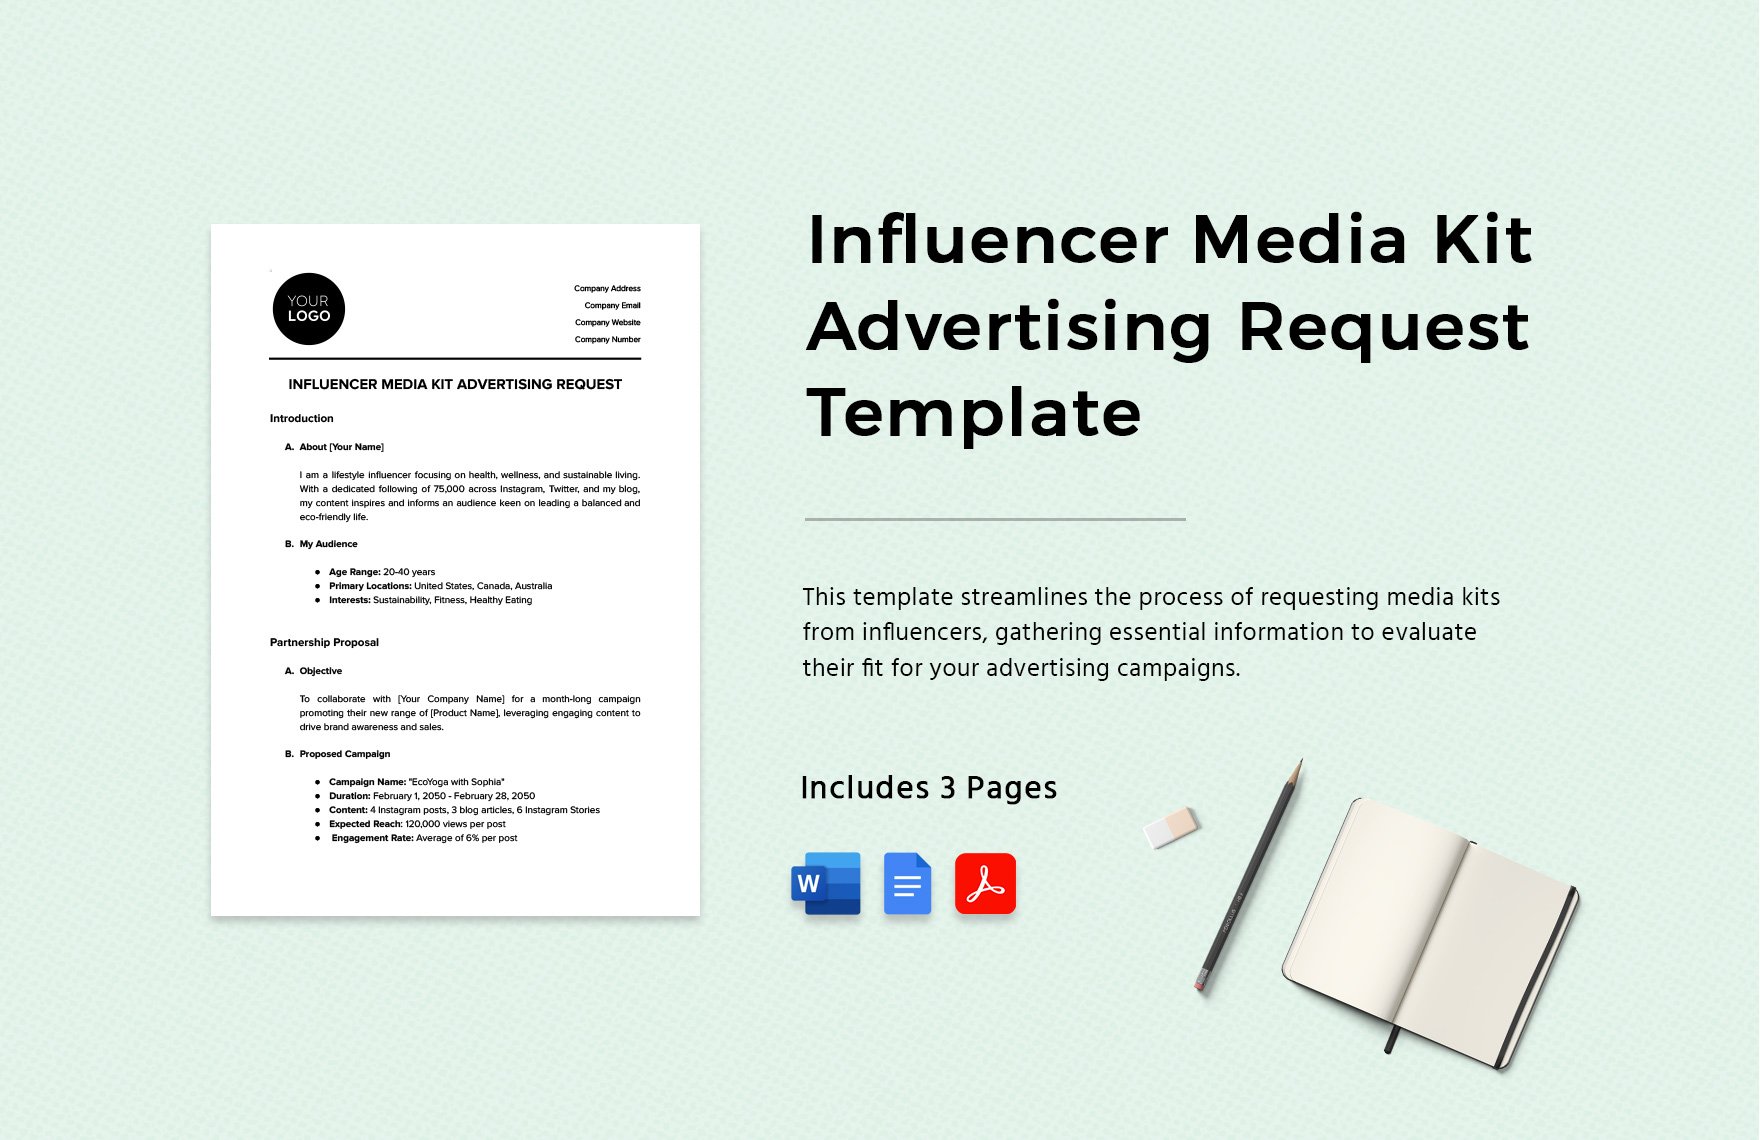 Influencer Media Kit Advertising Request Template